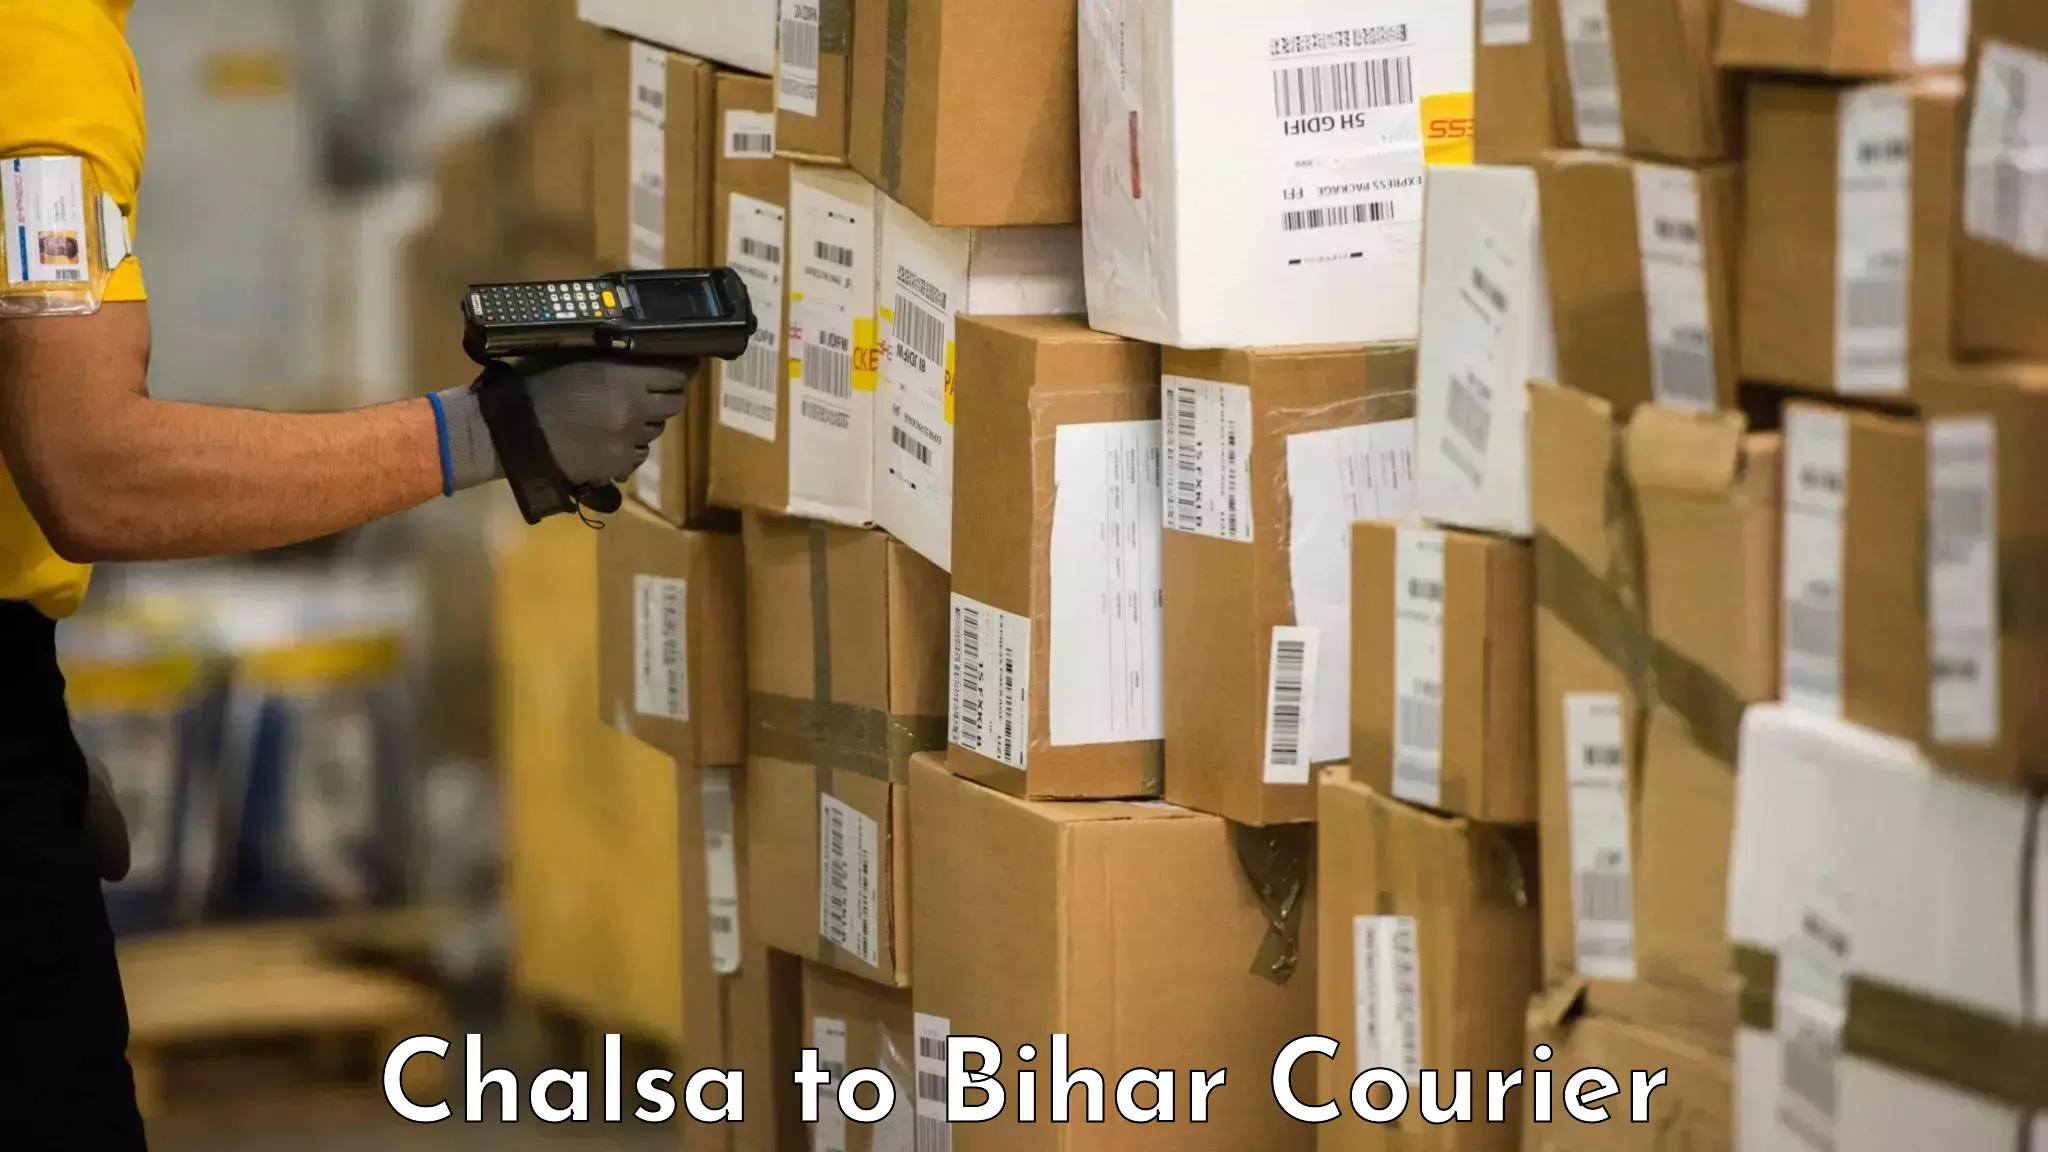 Luggage transport consulting Chalsa to Bihar